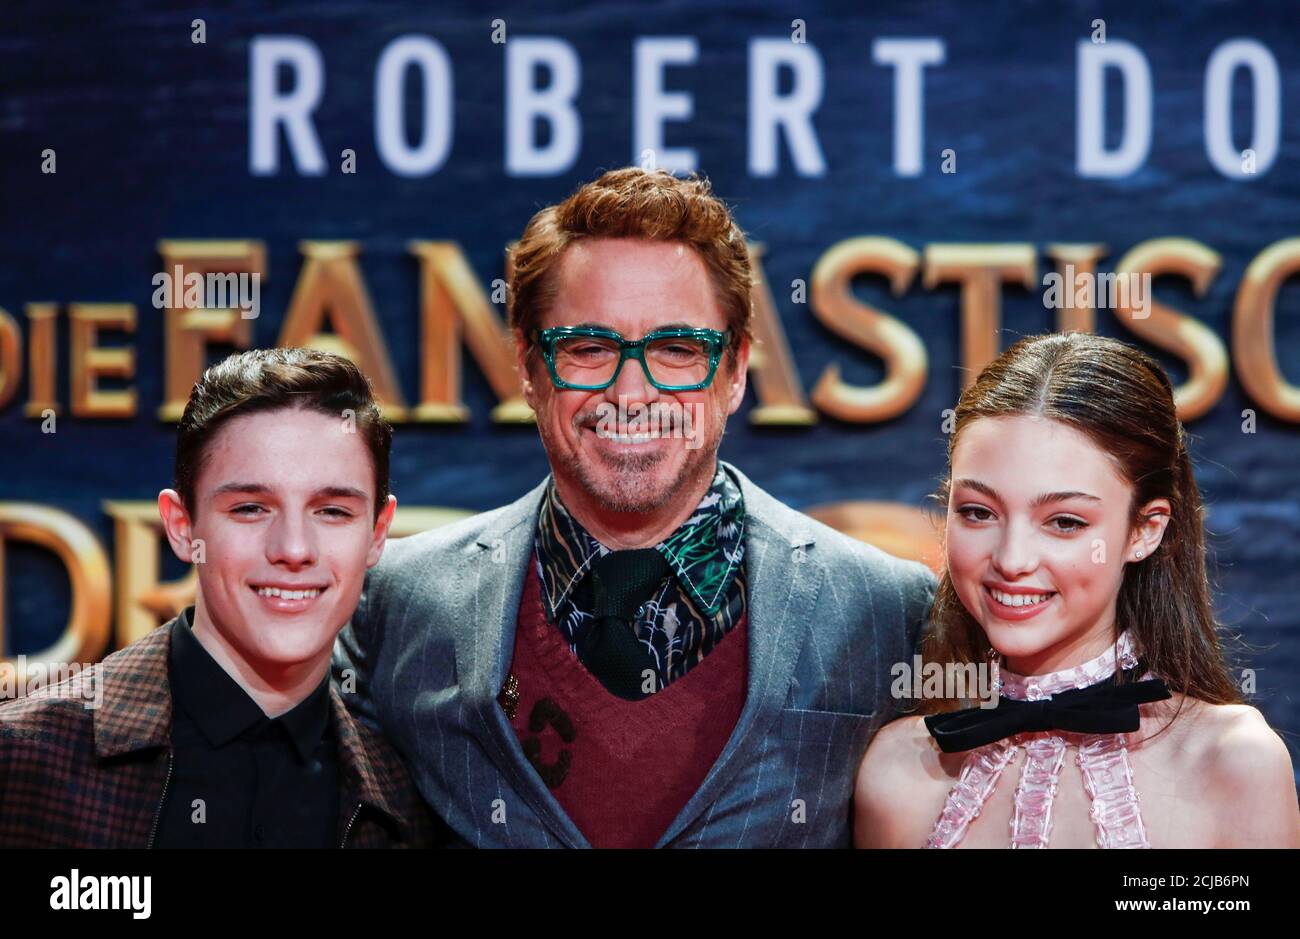 Cast members Robert Downey Jr., Harry Collett and Carmel Laniado attend the  premiere of the 